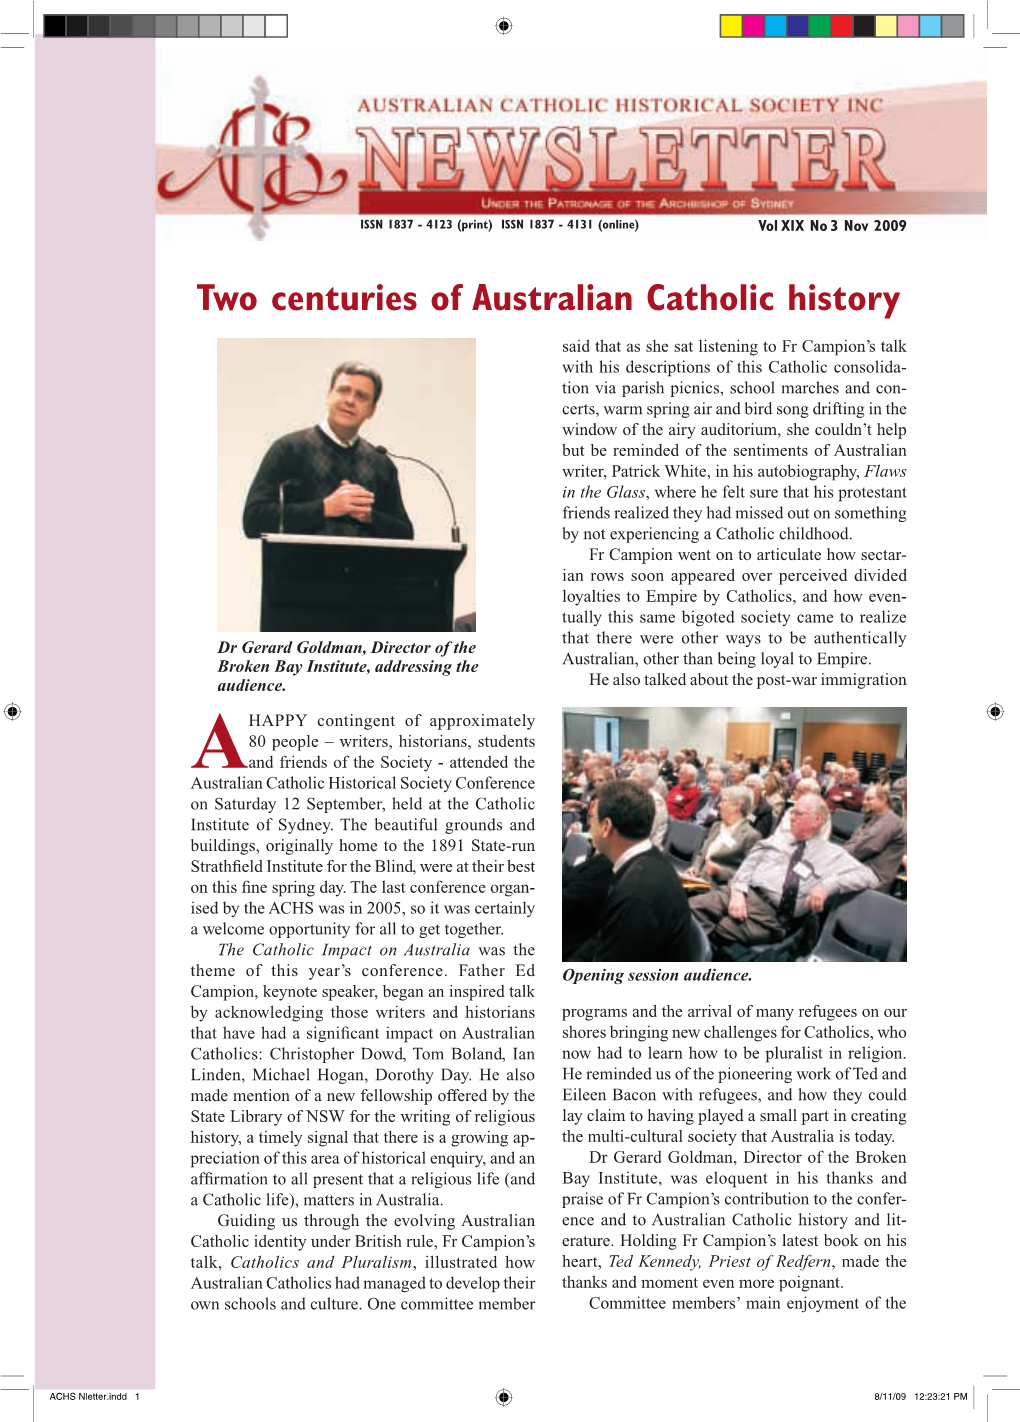 ACHS Nletter.Indd 1 8/11/09 12:23:21 PM Above: Keynote Speaker, Fr Ed Campion; Conference Organiser, Br John Luttrell; And, ACHS President, Dr Damian Gleeson